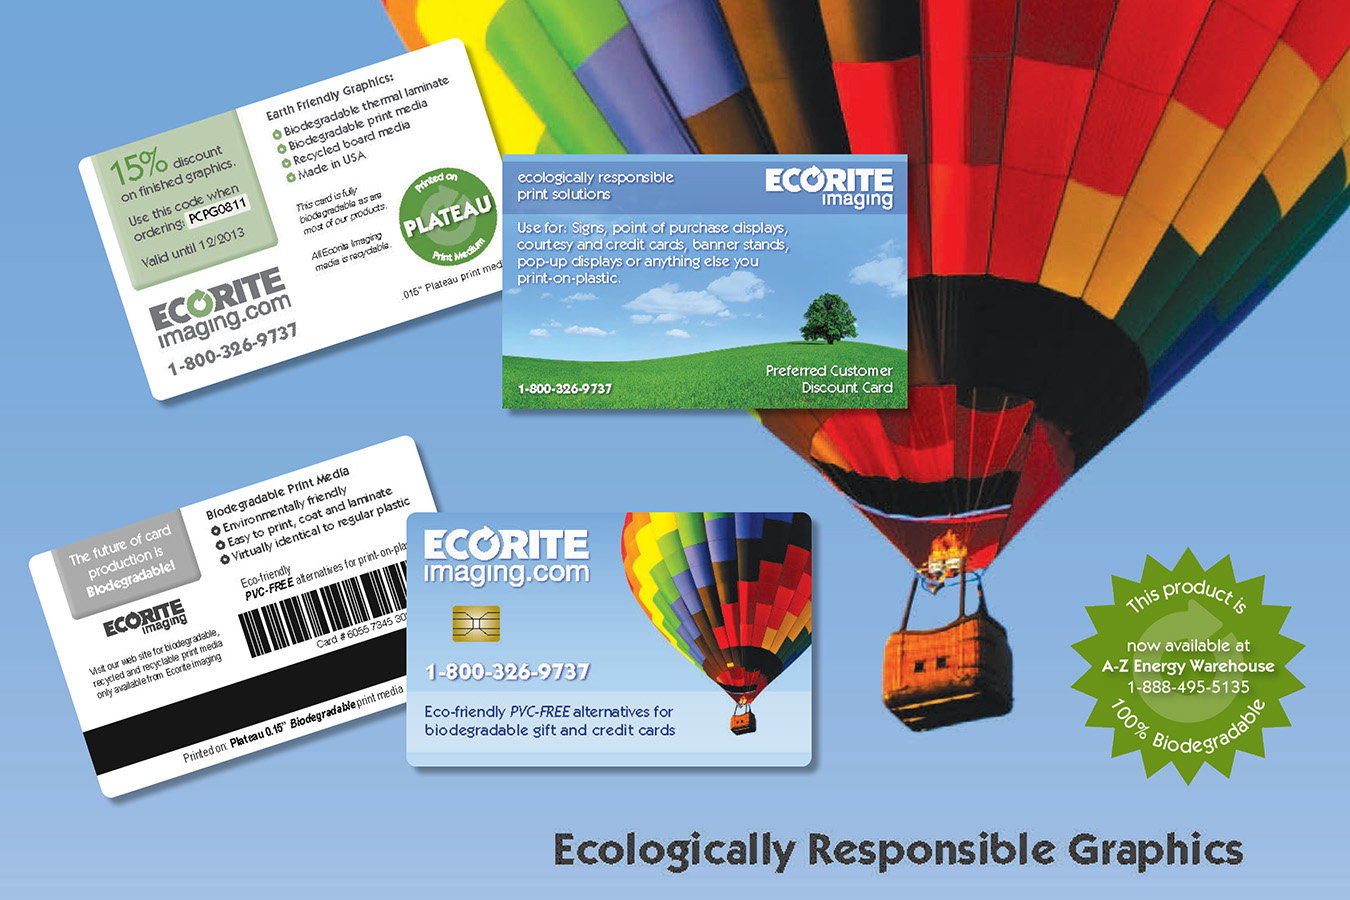 Ecorite Samps : Ecorite biodegradable plastic print samples with discount for use on graphic production